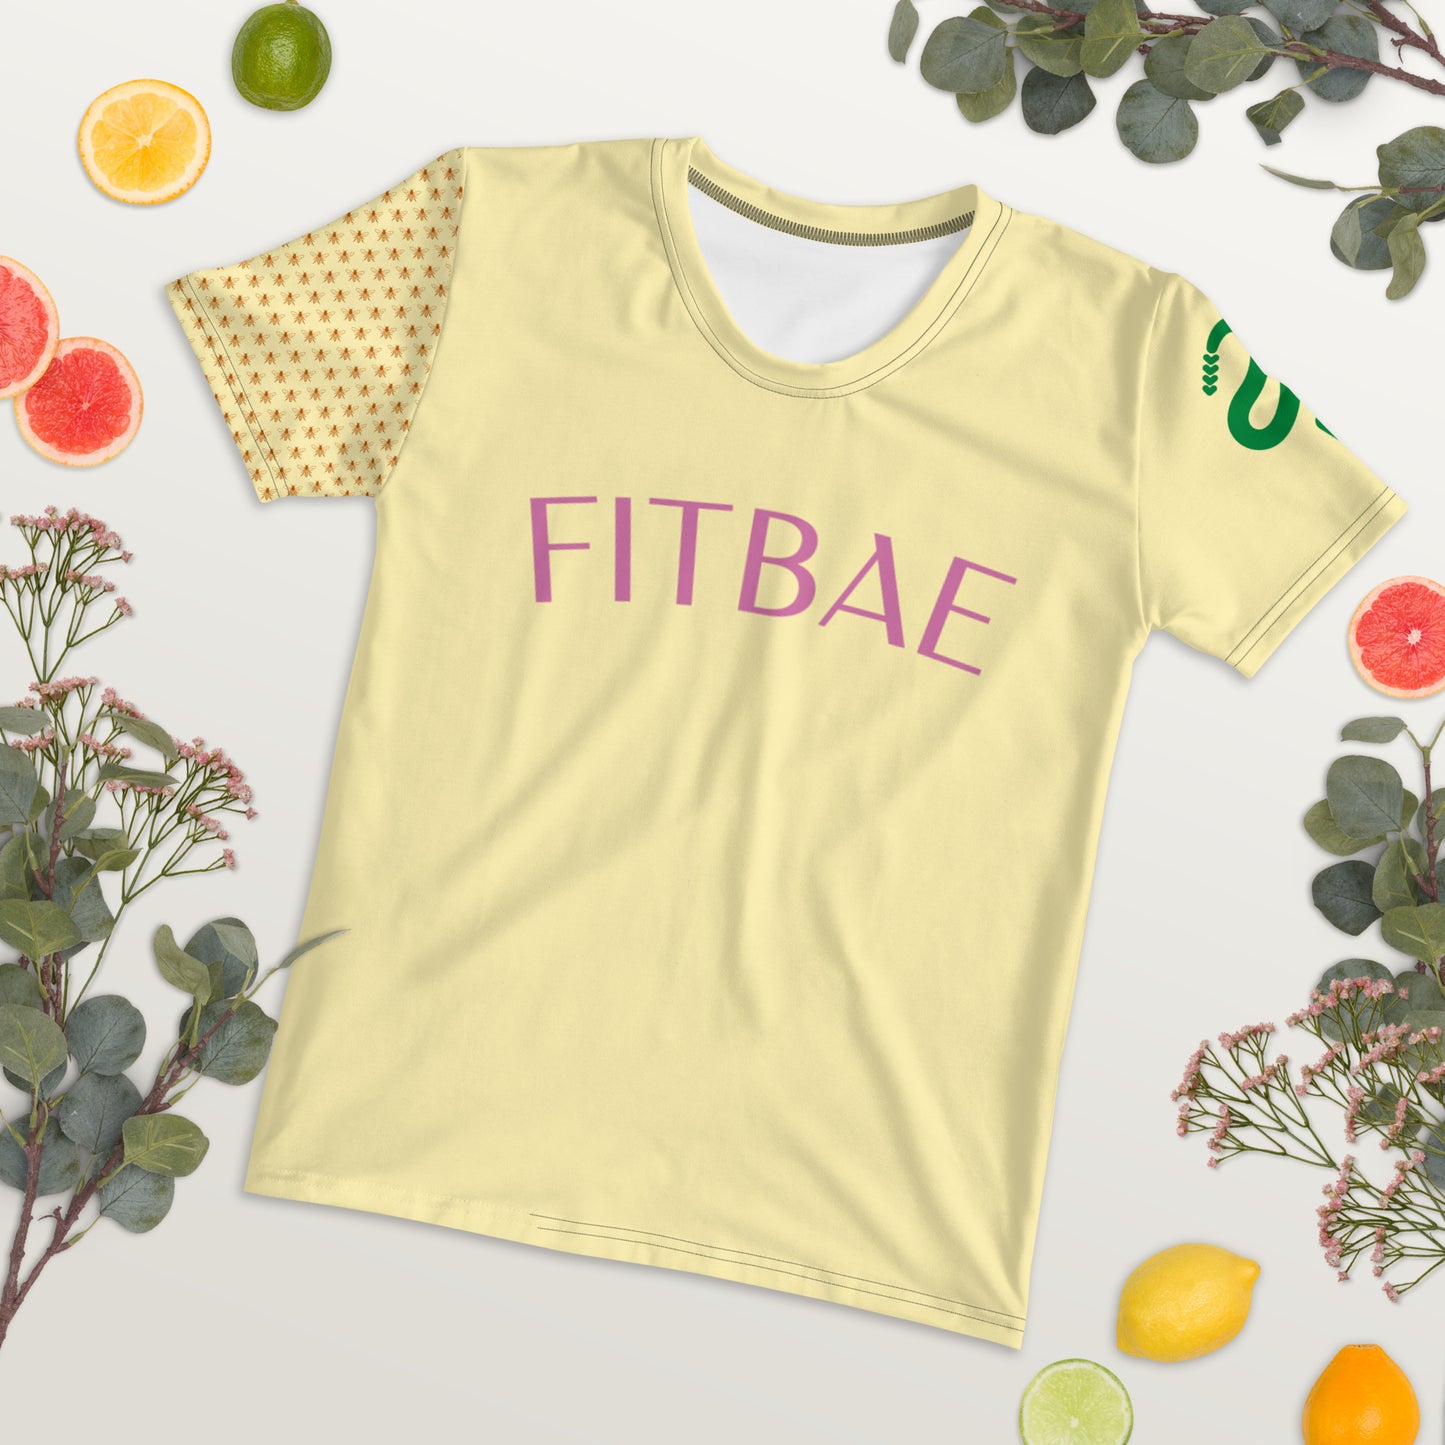 FitBae Busy Bee Women's T-shirt